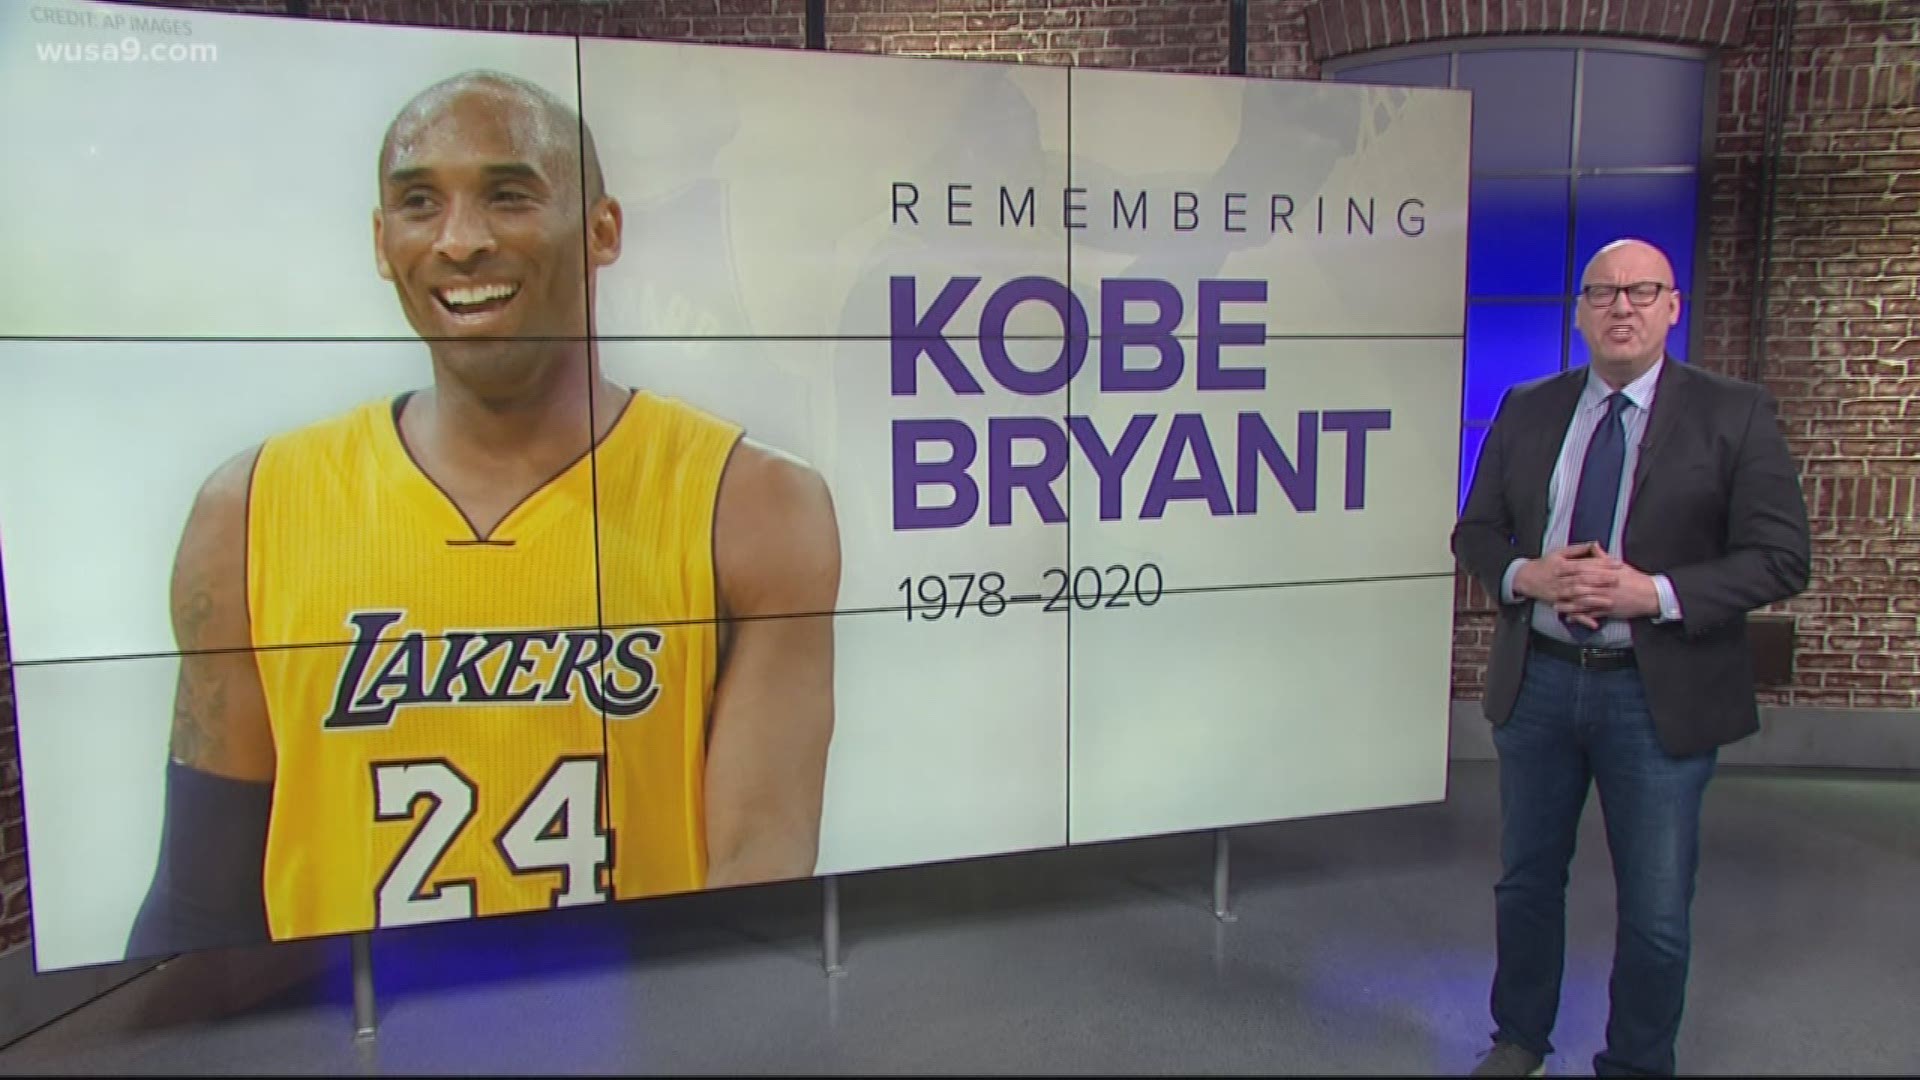 Mike Wise interviewed and spent time with Kobe Bryant over the years as a sports writer. He gives his take on the man, the myth and the legend that was Kobe.